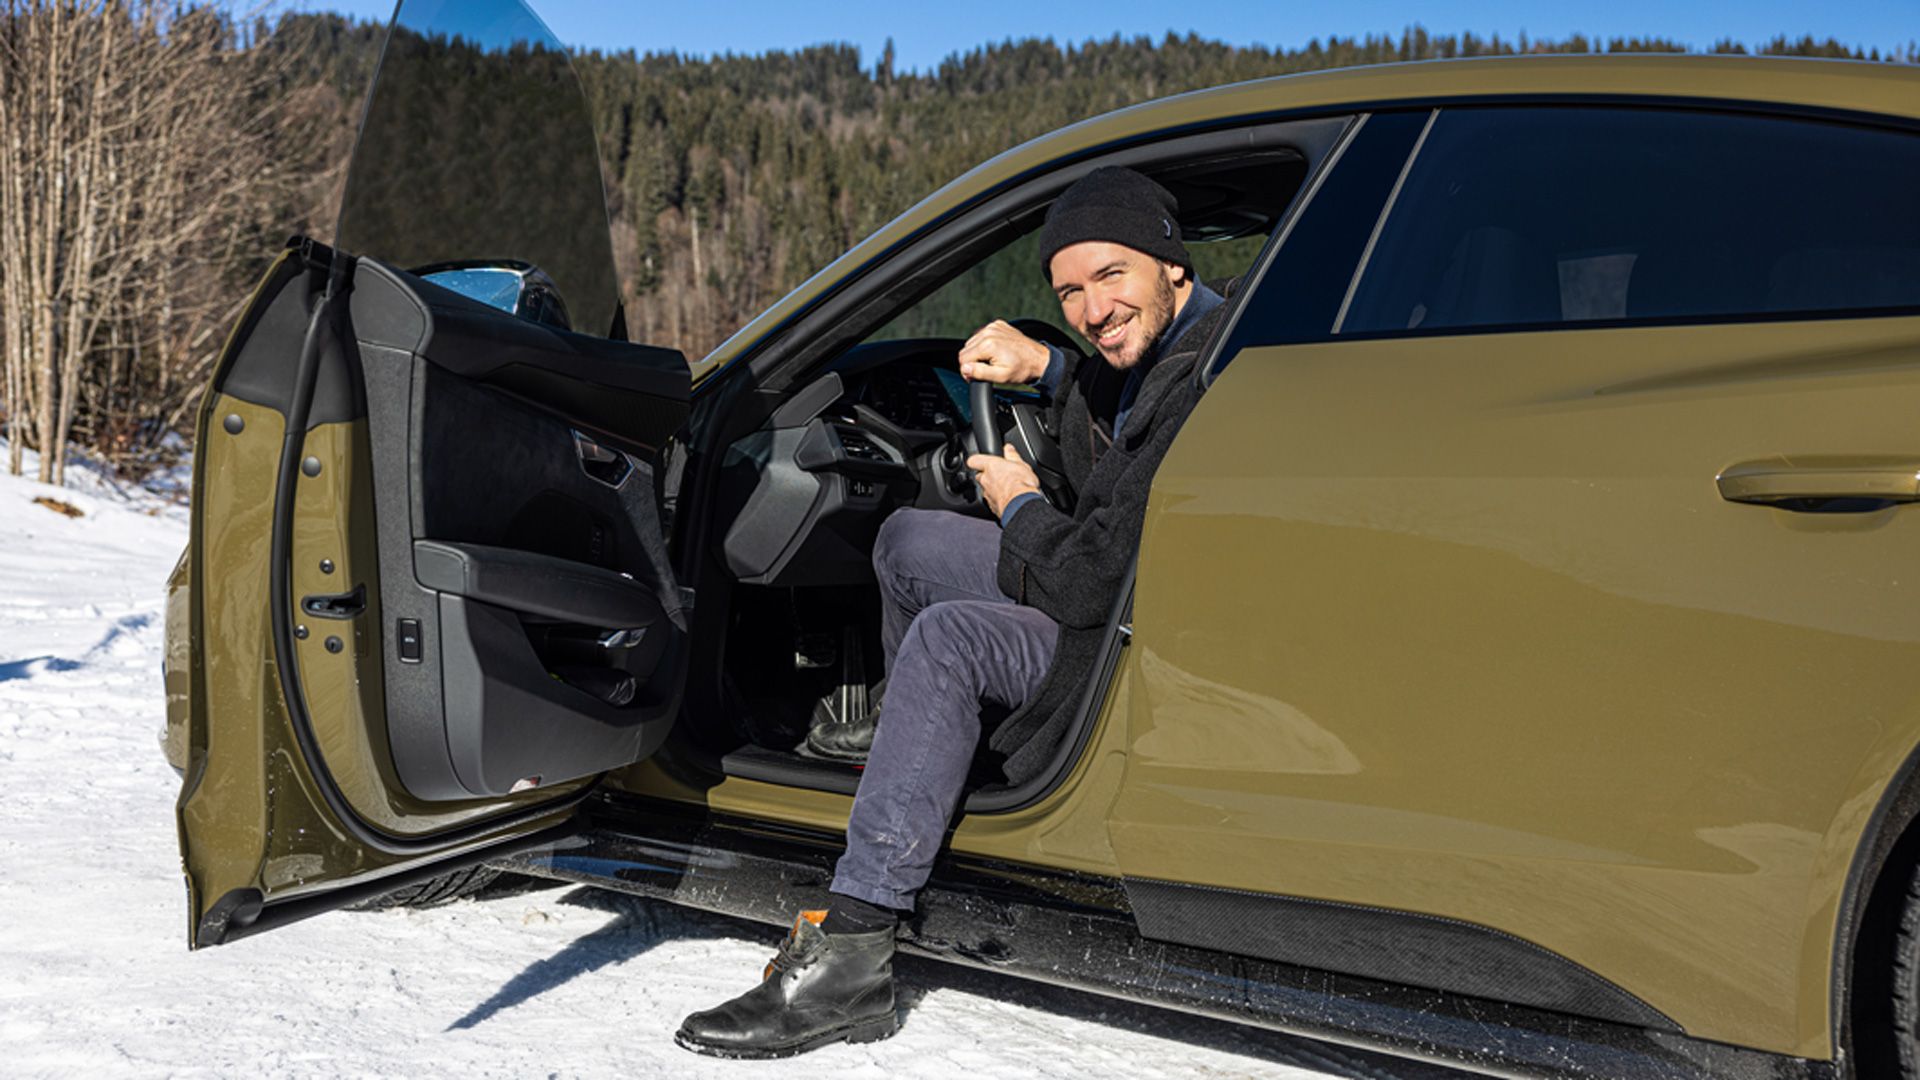 “For a long time I’ve wanted a vehicle that combines sportiness and sustainability. The Audi RS e-tron GT is ideal for me – both logically and emotionally,” says Felix Neureuther. The Audi simultaneously radiates sportiness, high quality and comfort.